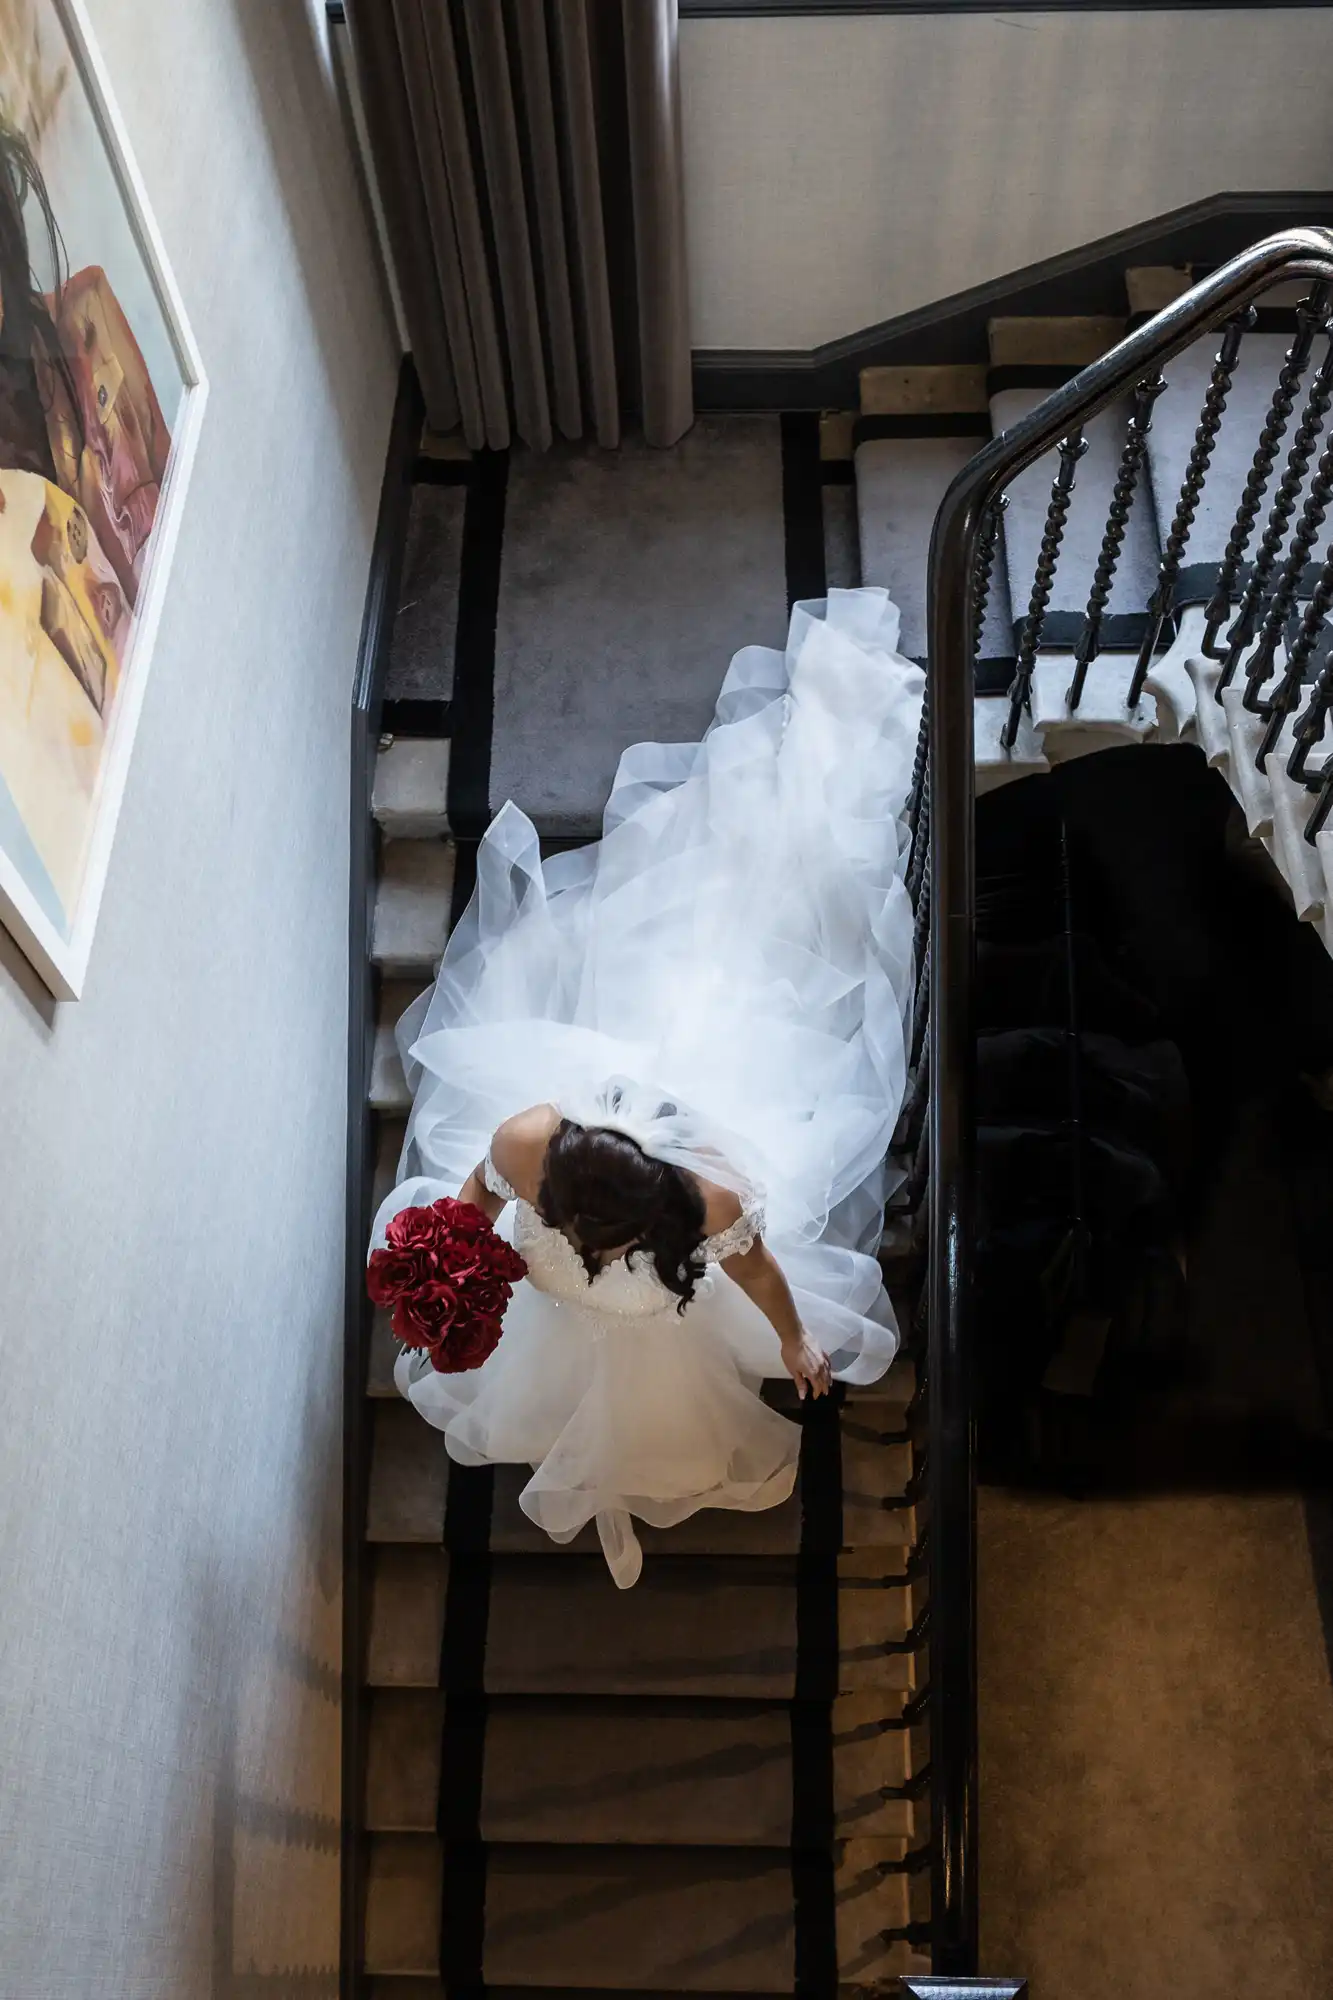 Bride in a white dress with a long train holding a red bouquet ascends a spiral staircase, viewed from above.